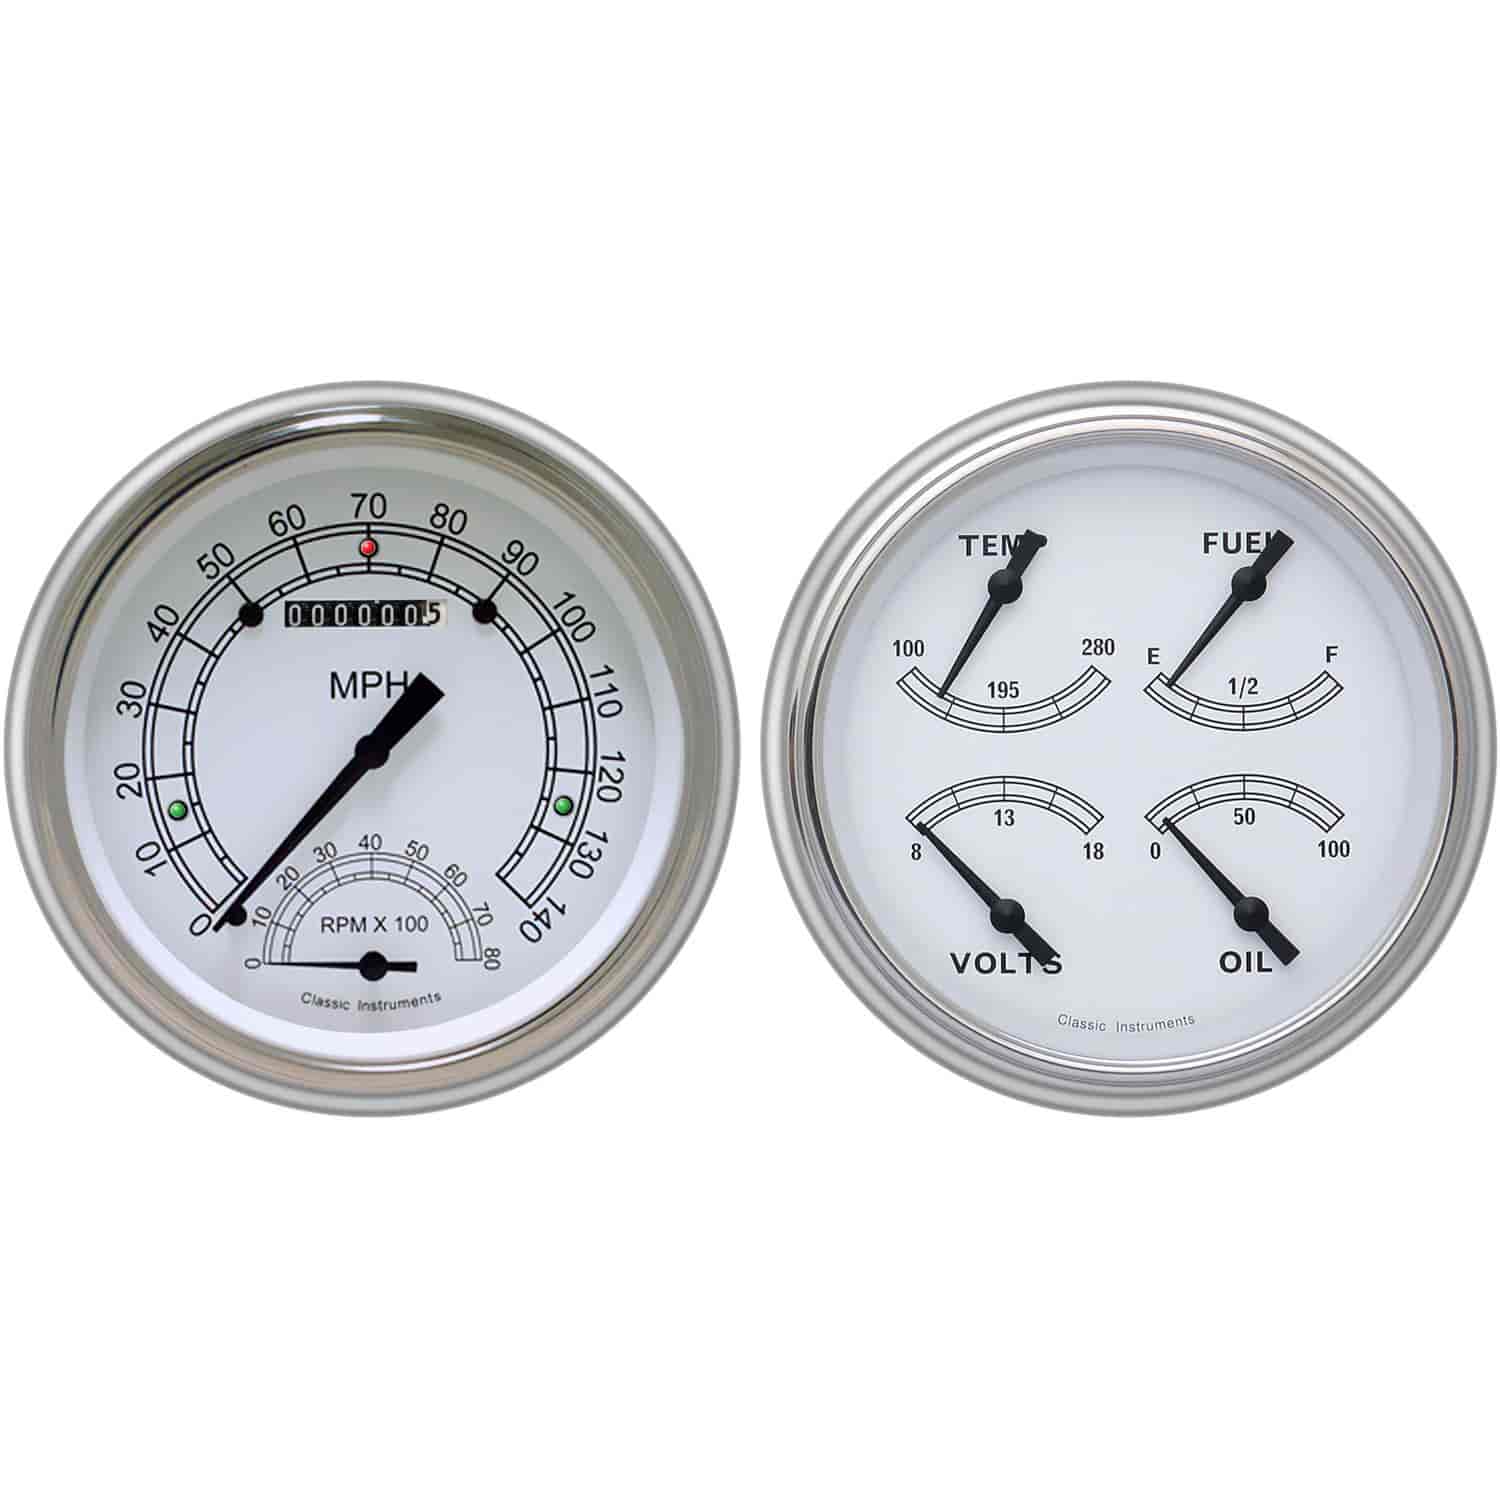 Classic White Series Gauge Package 1951-52 Chevy Car Includes: